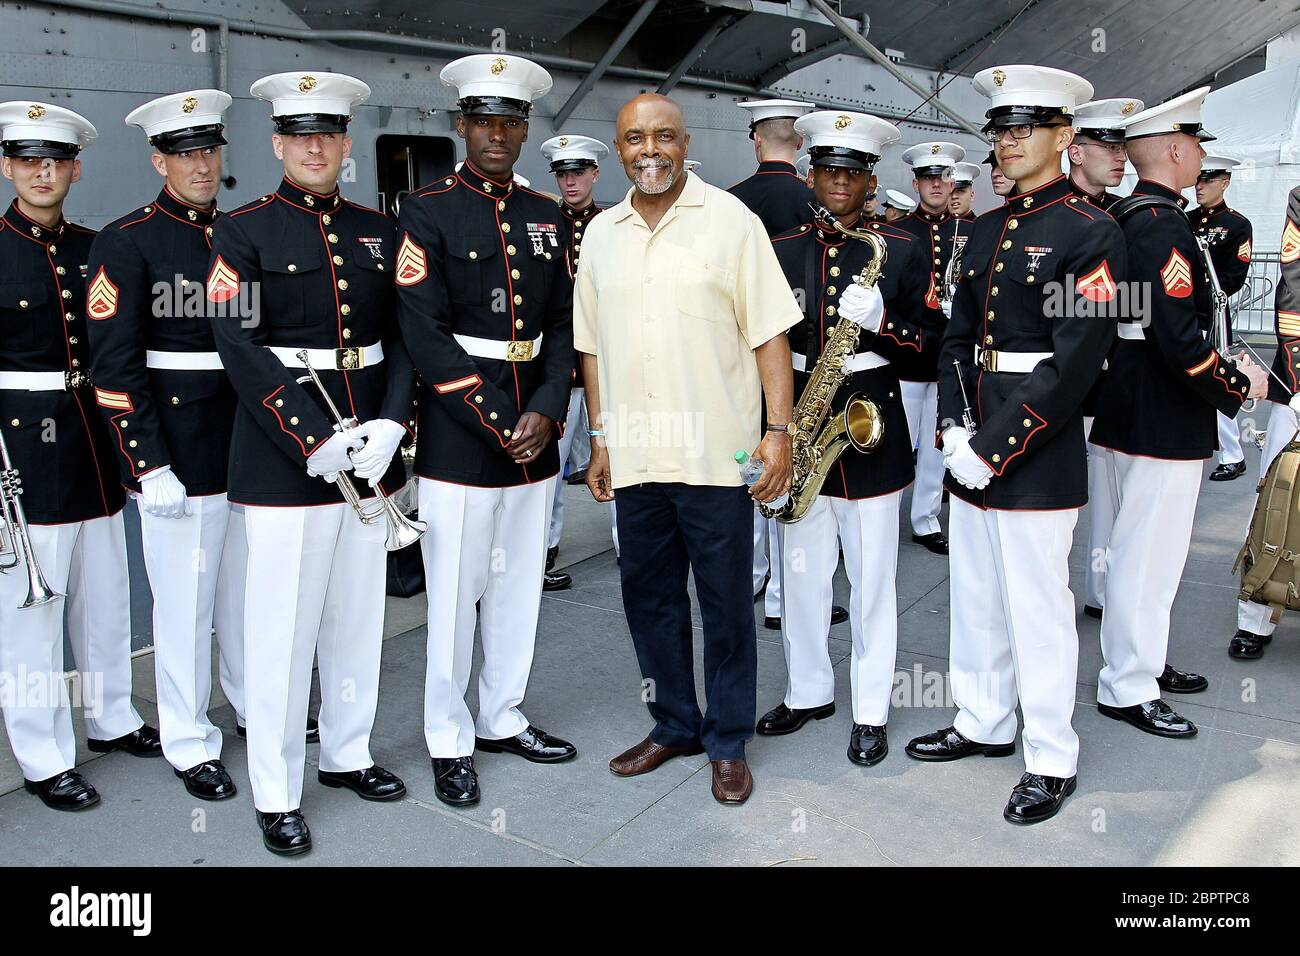 New York, NY, USA. 26 May, 2012. Roscoe Orman, aka, Gordon Robinson, poses with members of Quantico Marine Corps Band at the Sesame Workshop's 'Little Children, Big Challenges' Outreach Launch at the Intrepid Sea-Air-Space Museum. Credit: Steve Mack/Alamy Stock Photo